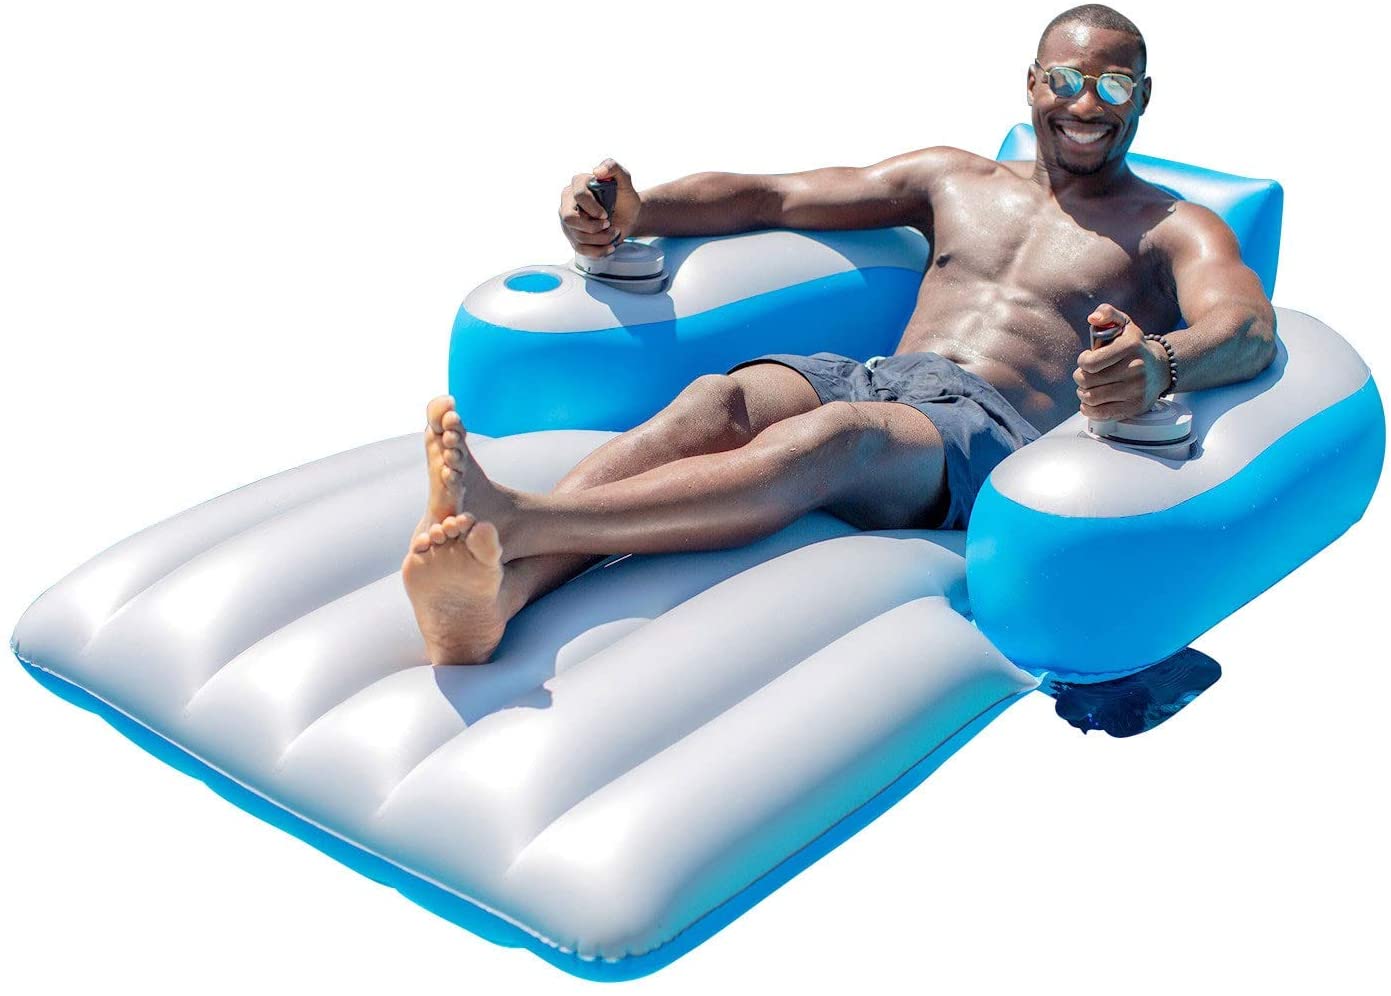 The 17 Best Pool Toys and Floats for an Unforgettable Pool Party